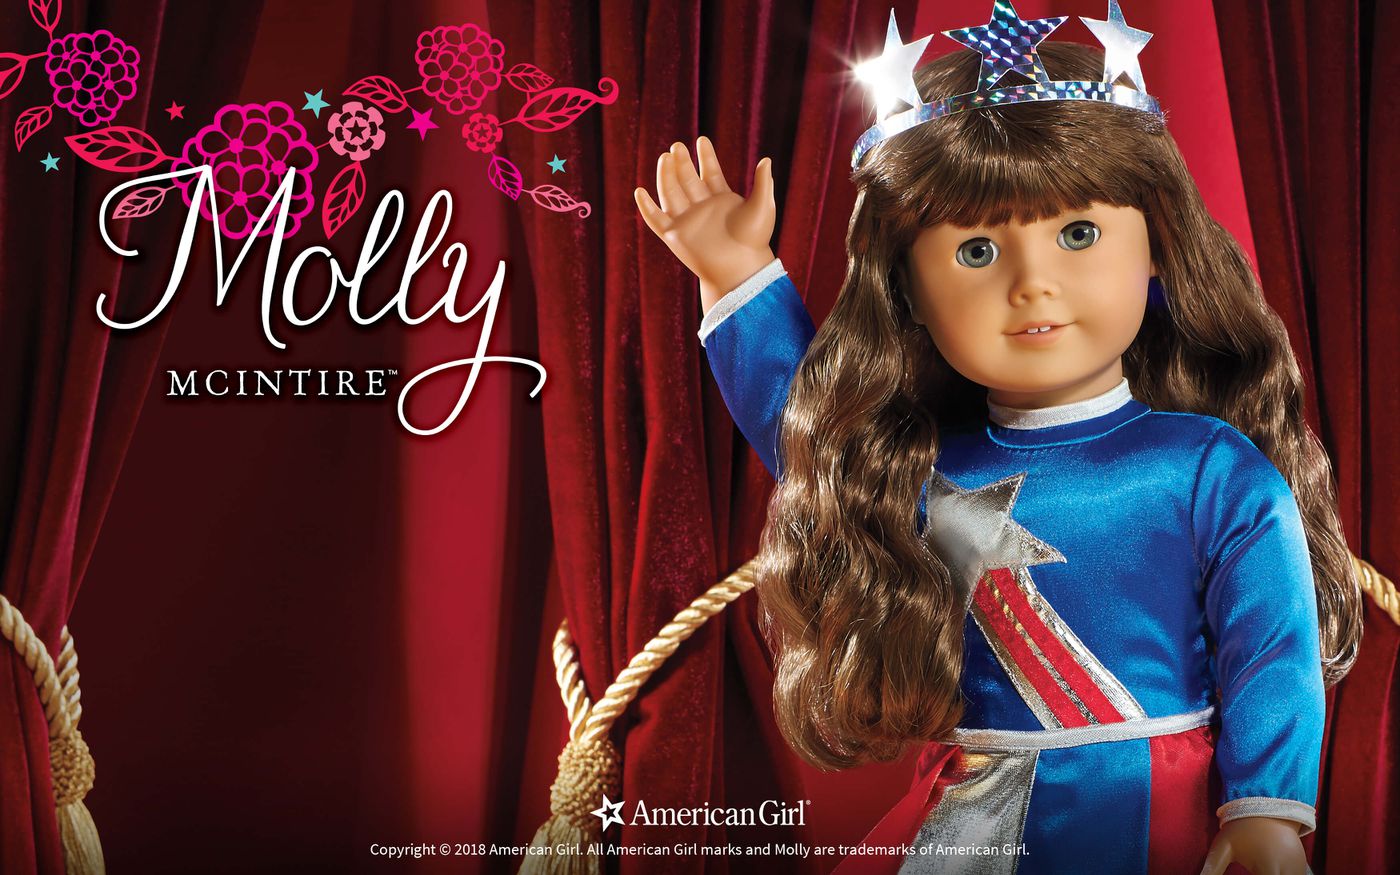 American Girl Doll Wallpapers.